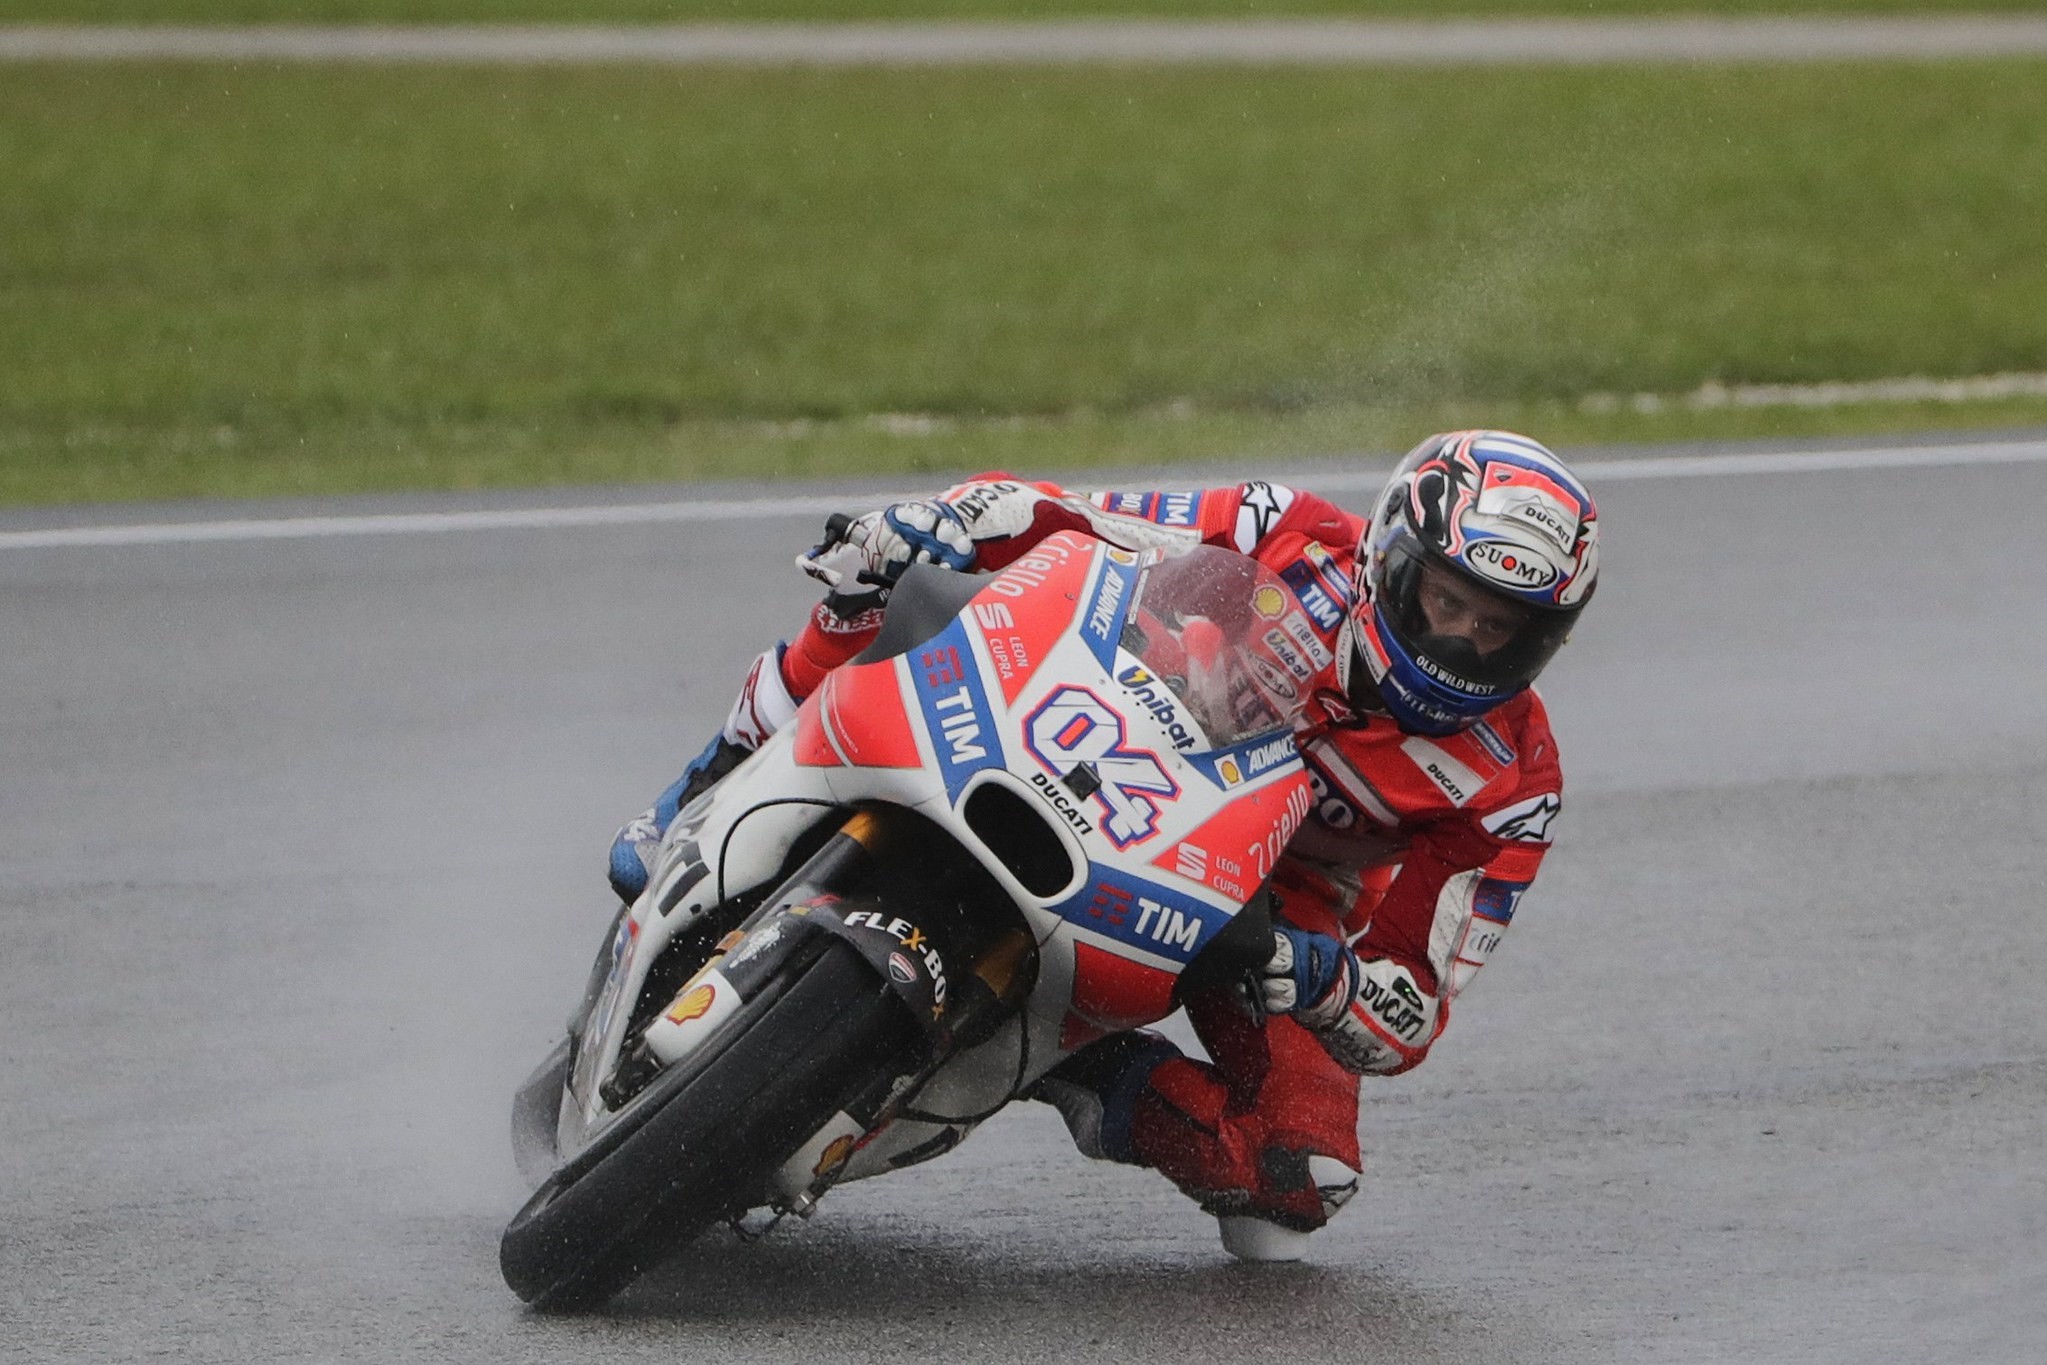 Italian MotoGP rider Andrea Dovizioso of the Ducati Team in action during the 2017 Malaysian Motorcycling Grand Prix at Sepang International Circuit, outside Kuala Lumpur.